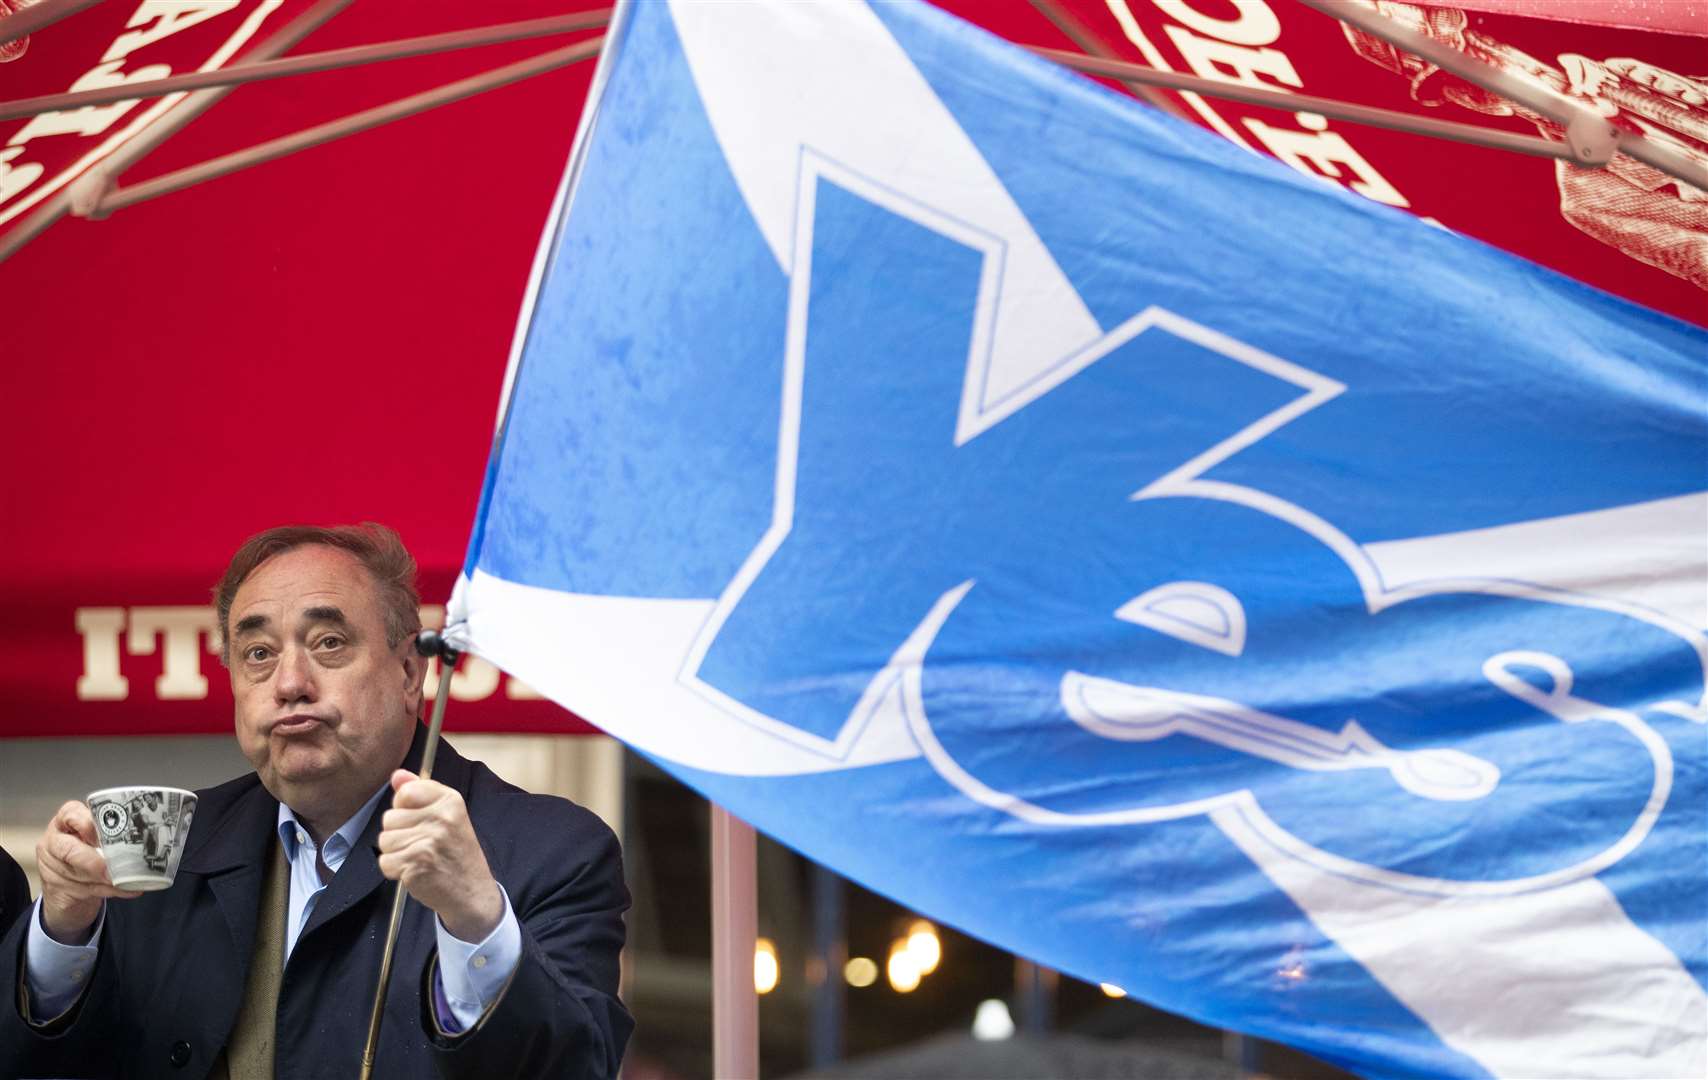 Alba Party leader Alex Salmond during a visit to the Scotsman Lounge in Edinburgh on the campaign trail. Alba failed to take a seat at Holyrood (Jane Barlow/PA)